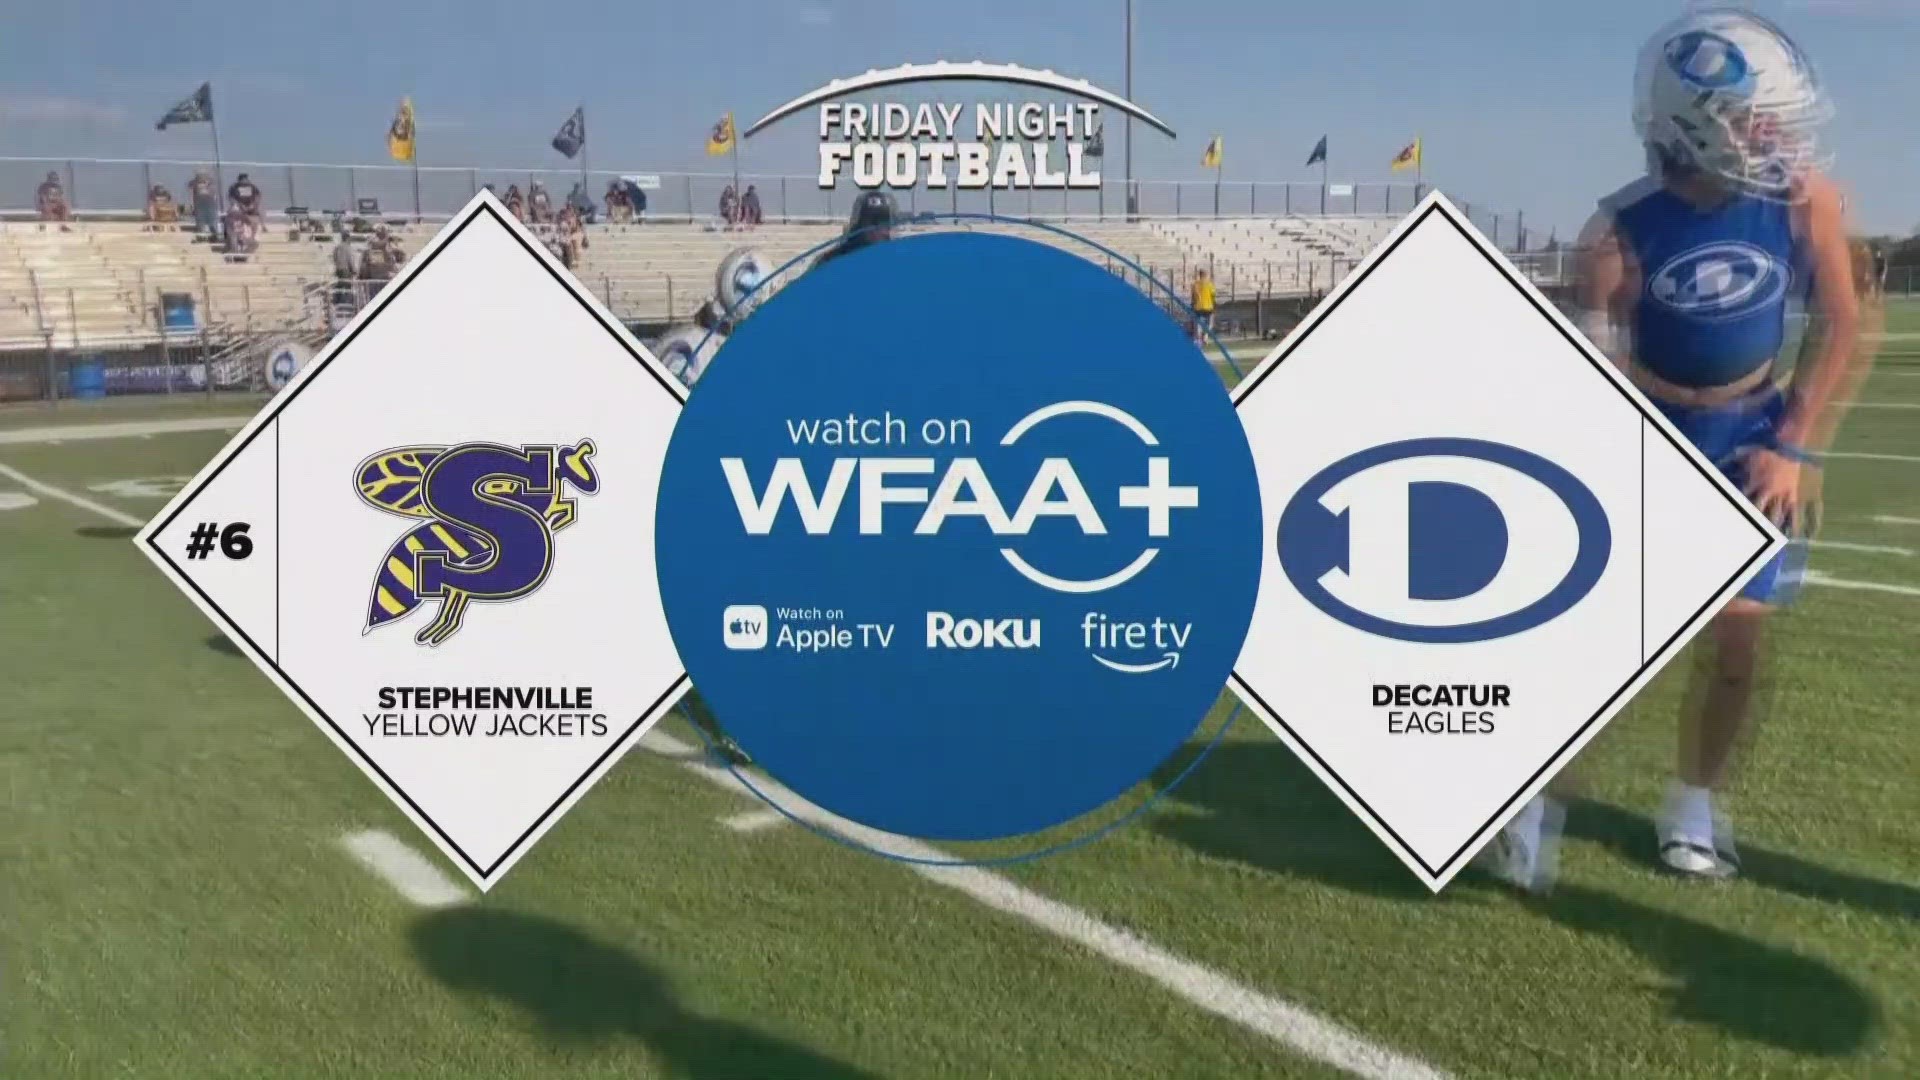 Friday Night Football Replay: #6 Stephenville at Decatur